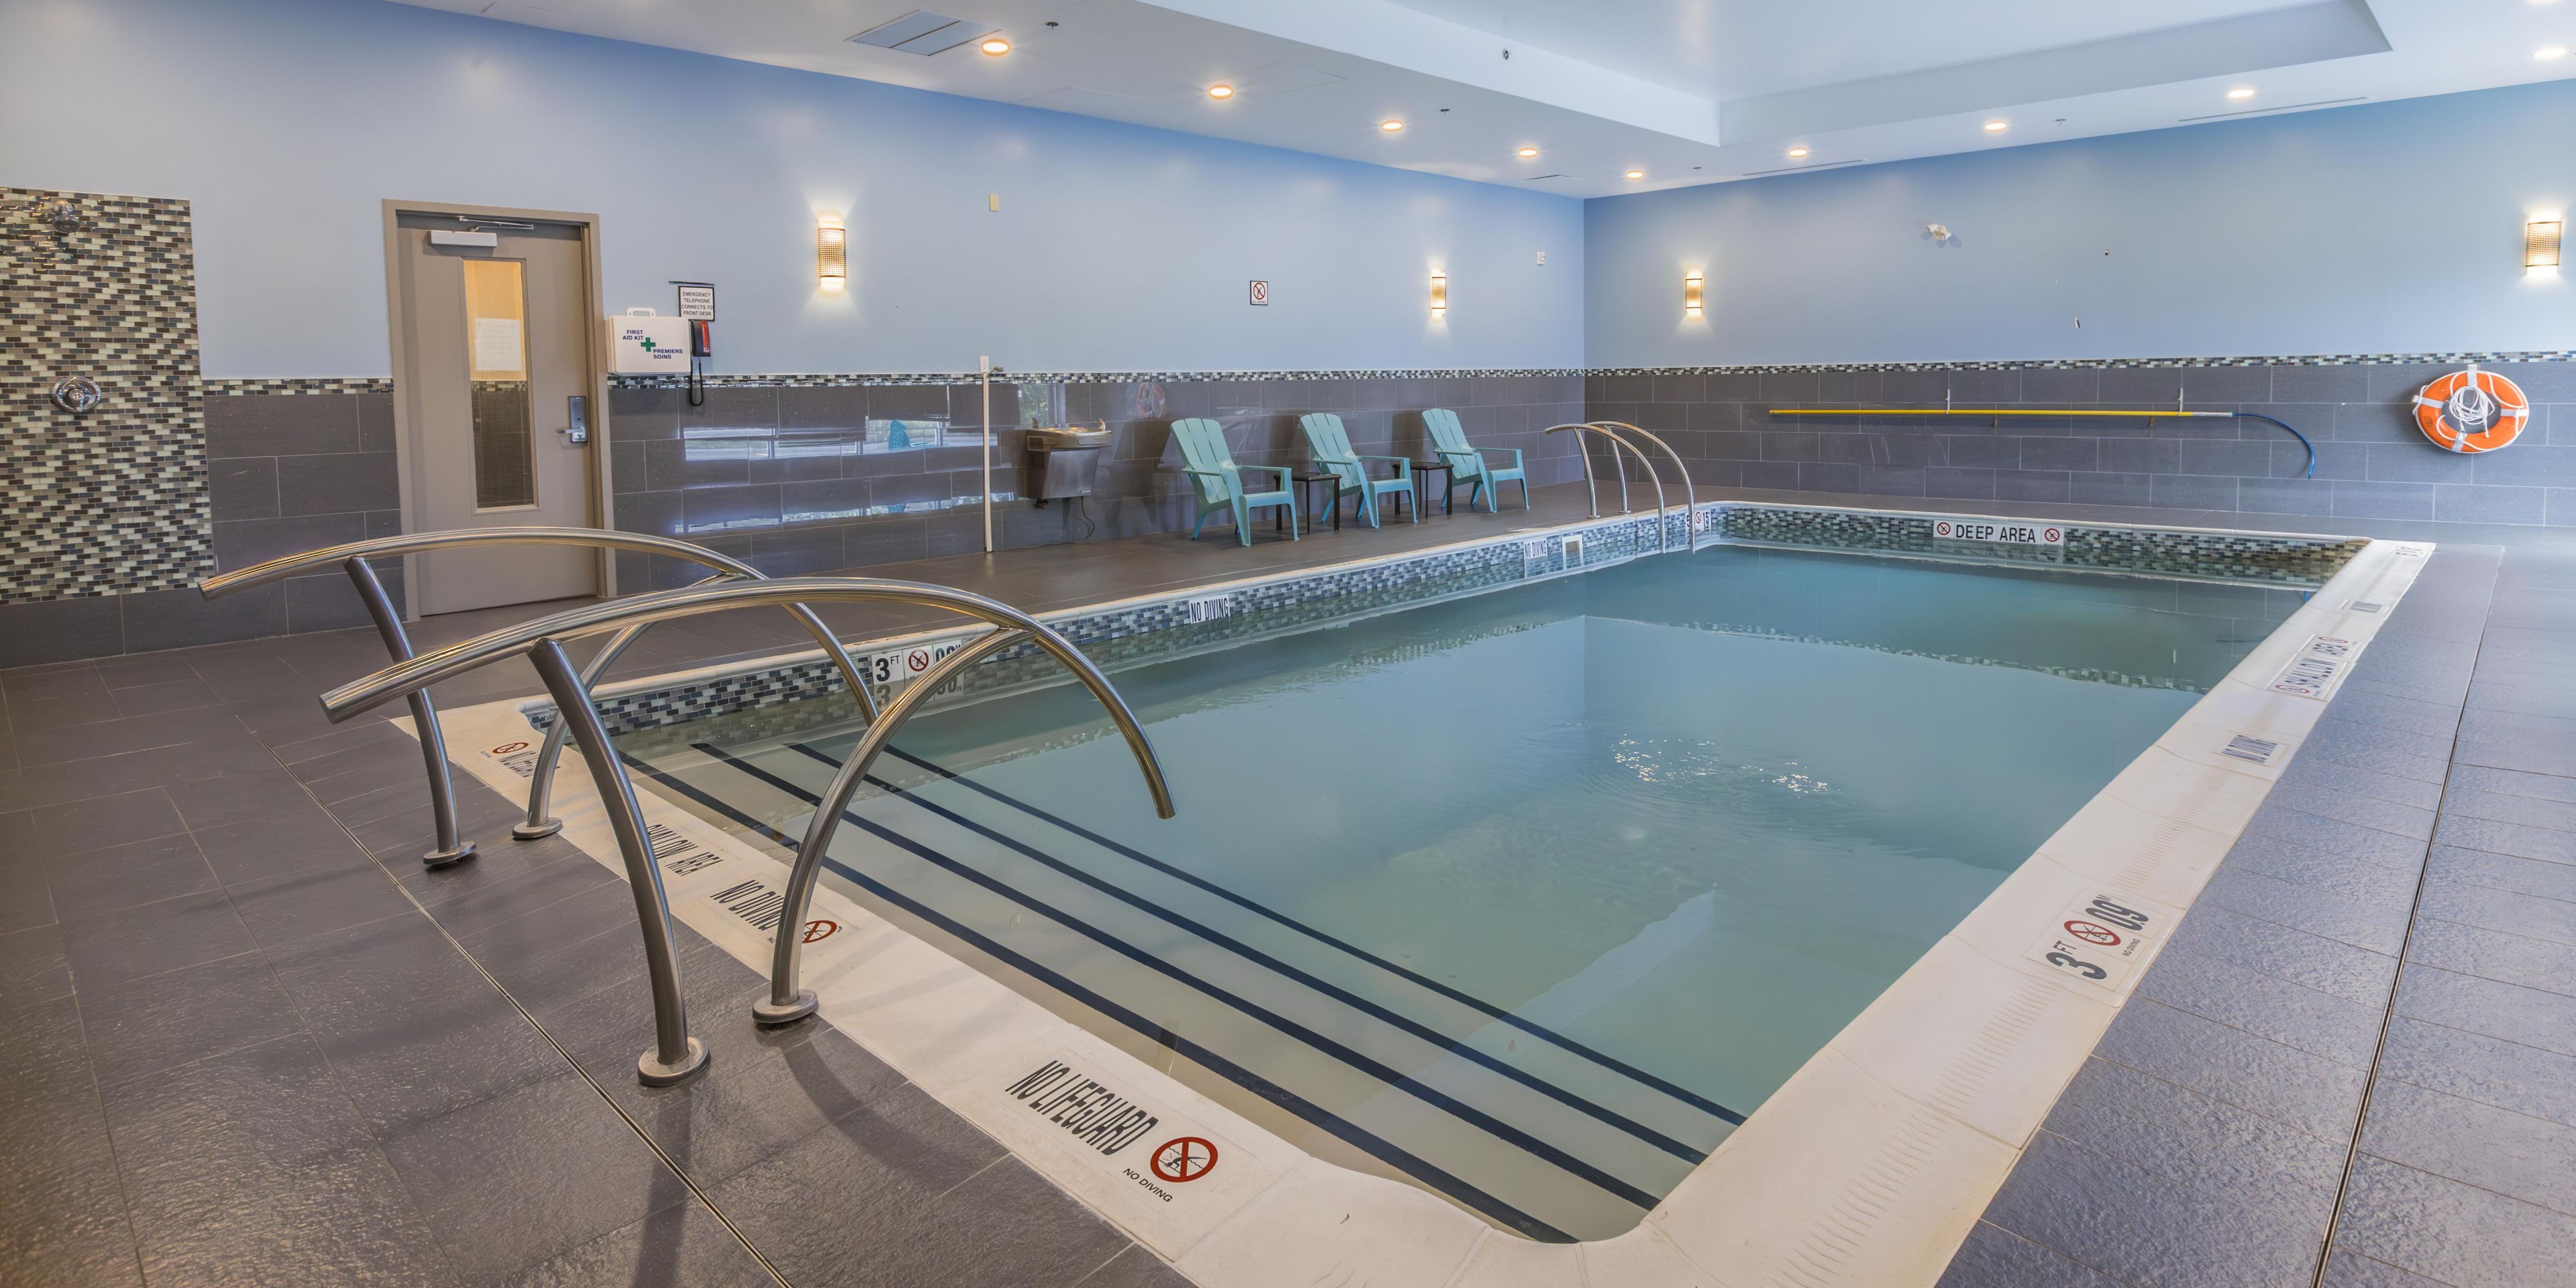 Life is better when you're swimming. Enjoy our relaxing indoor heated pool on your next stay!